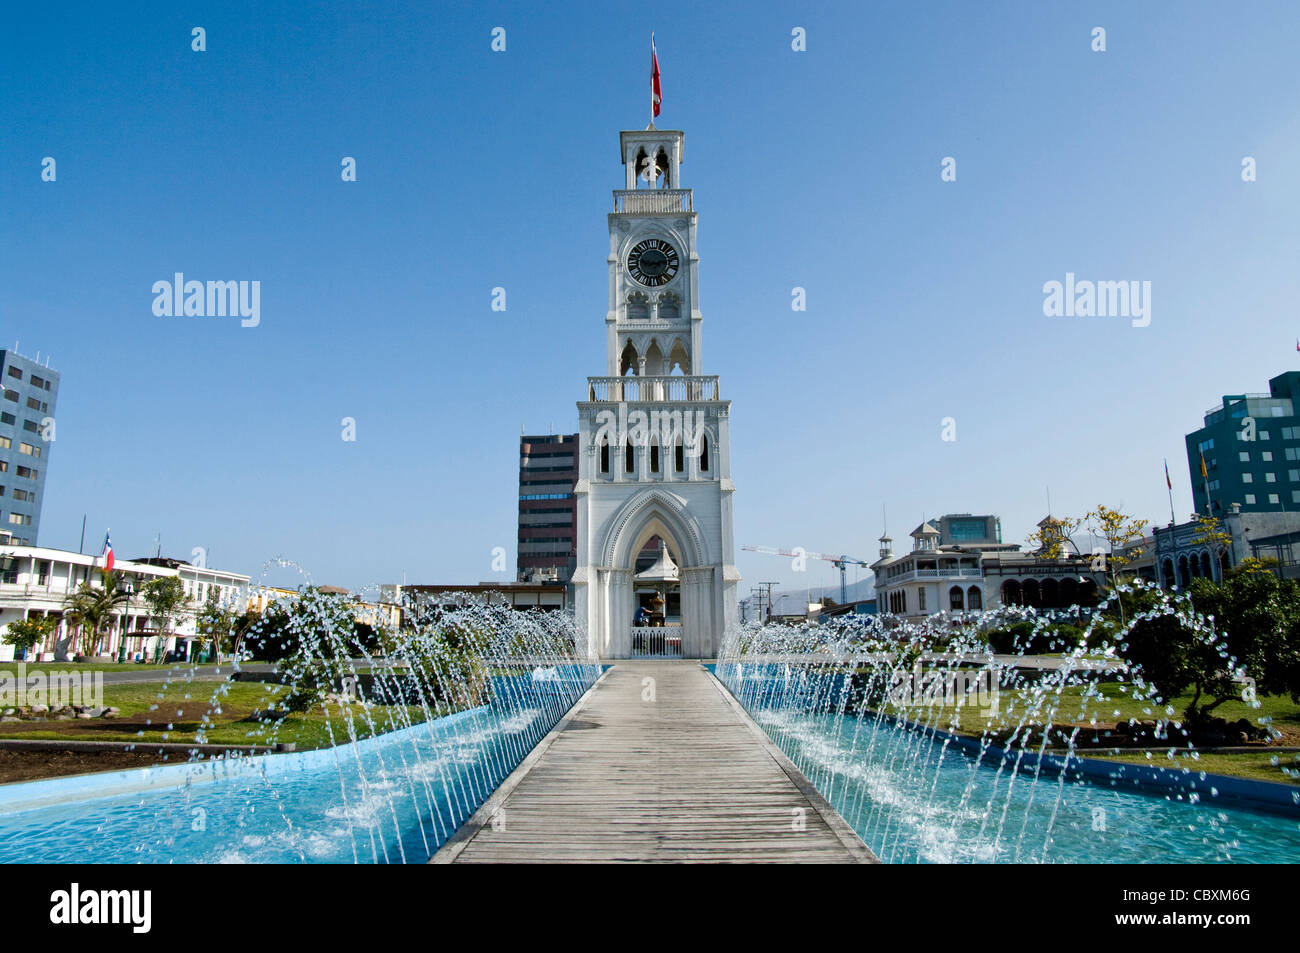 Chile. Iquique city. Prat square and the clock tower. Stock Photo